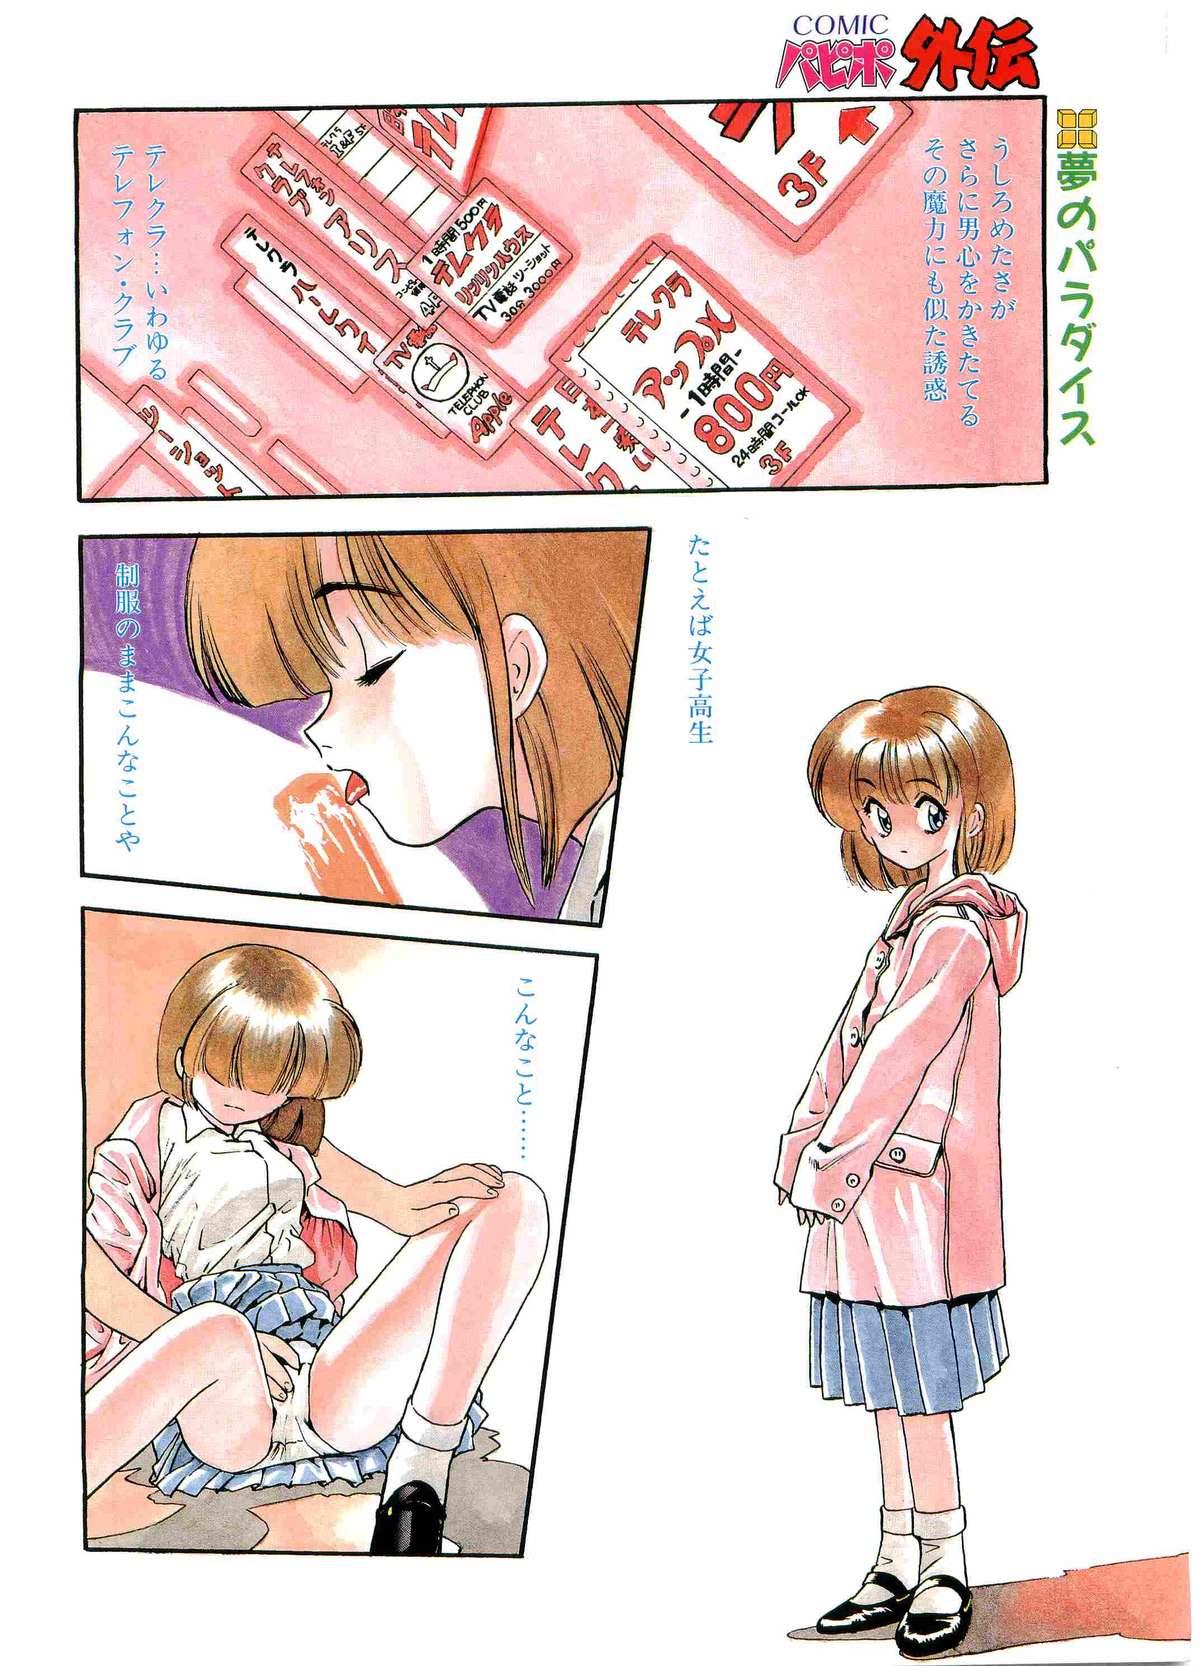 Sextoys COMIC Papipo Gaiden 1995-03 Thong - Page 4